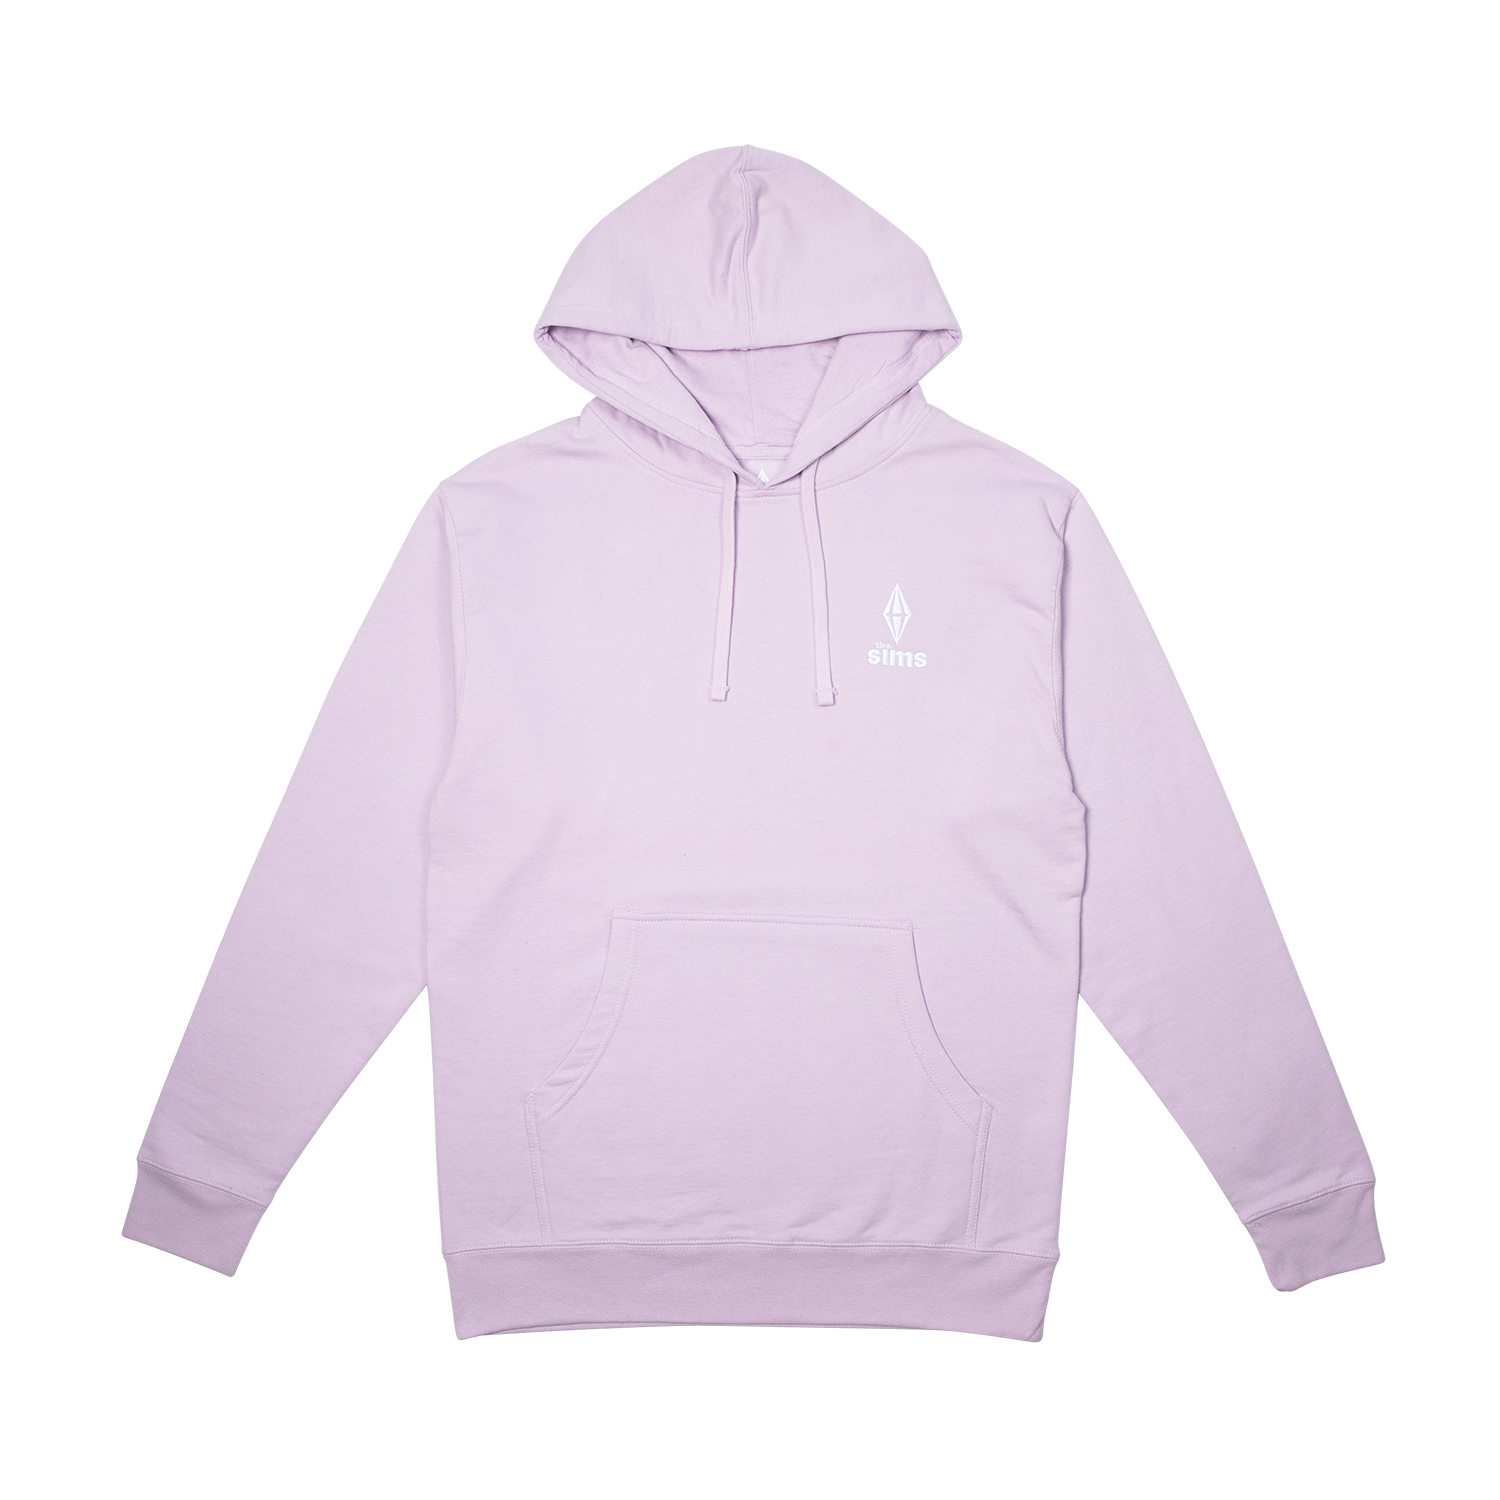 The Sims™ Embroidered Hoodie – The Sims Shop